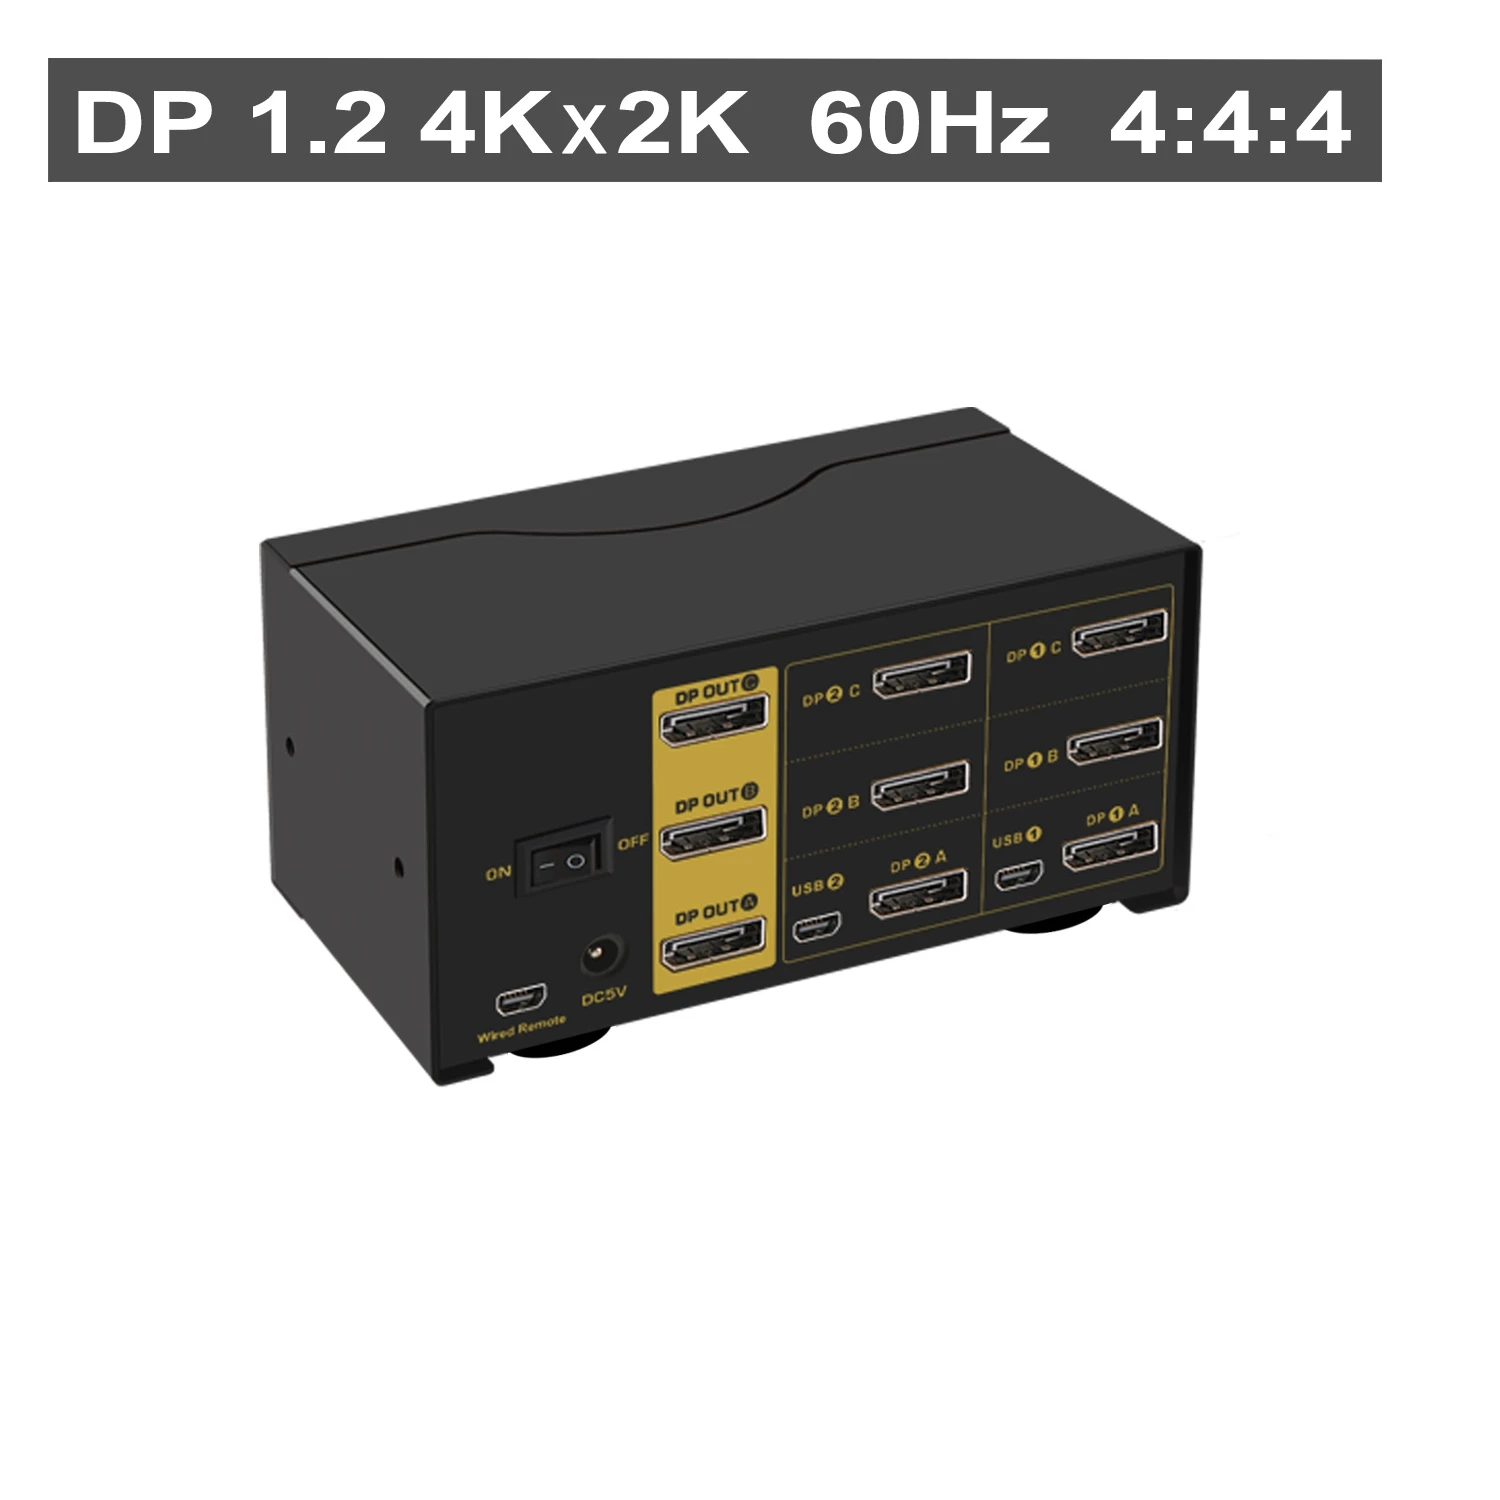 2port triple monitor Displayport KVM Switch , Extended Display, 4K@60Hz, 4:4:4 , with audio and USB Hub